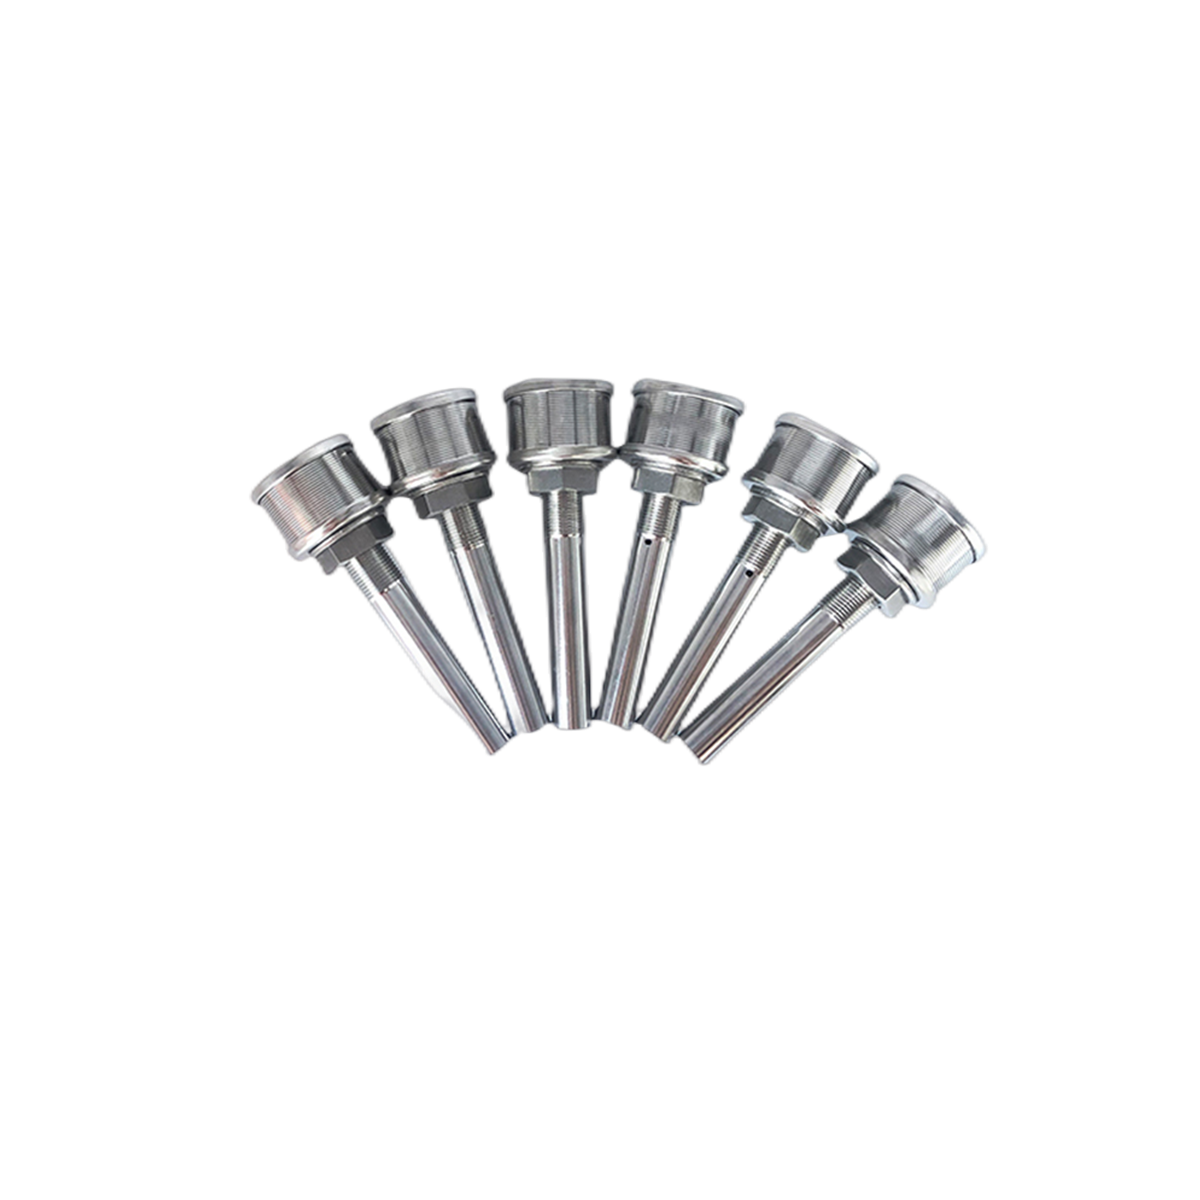 Wedge Wire Filter Nozzle